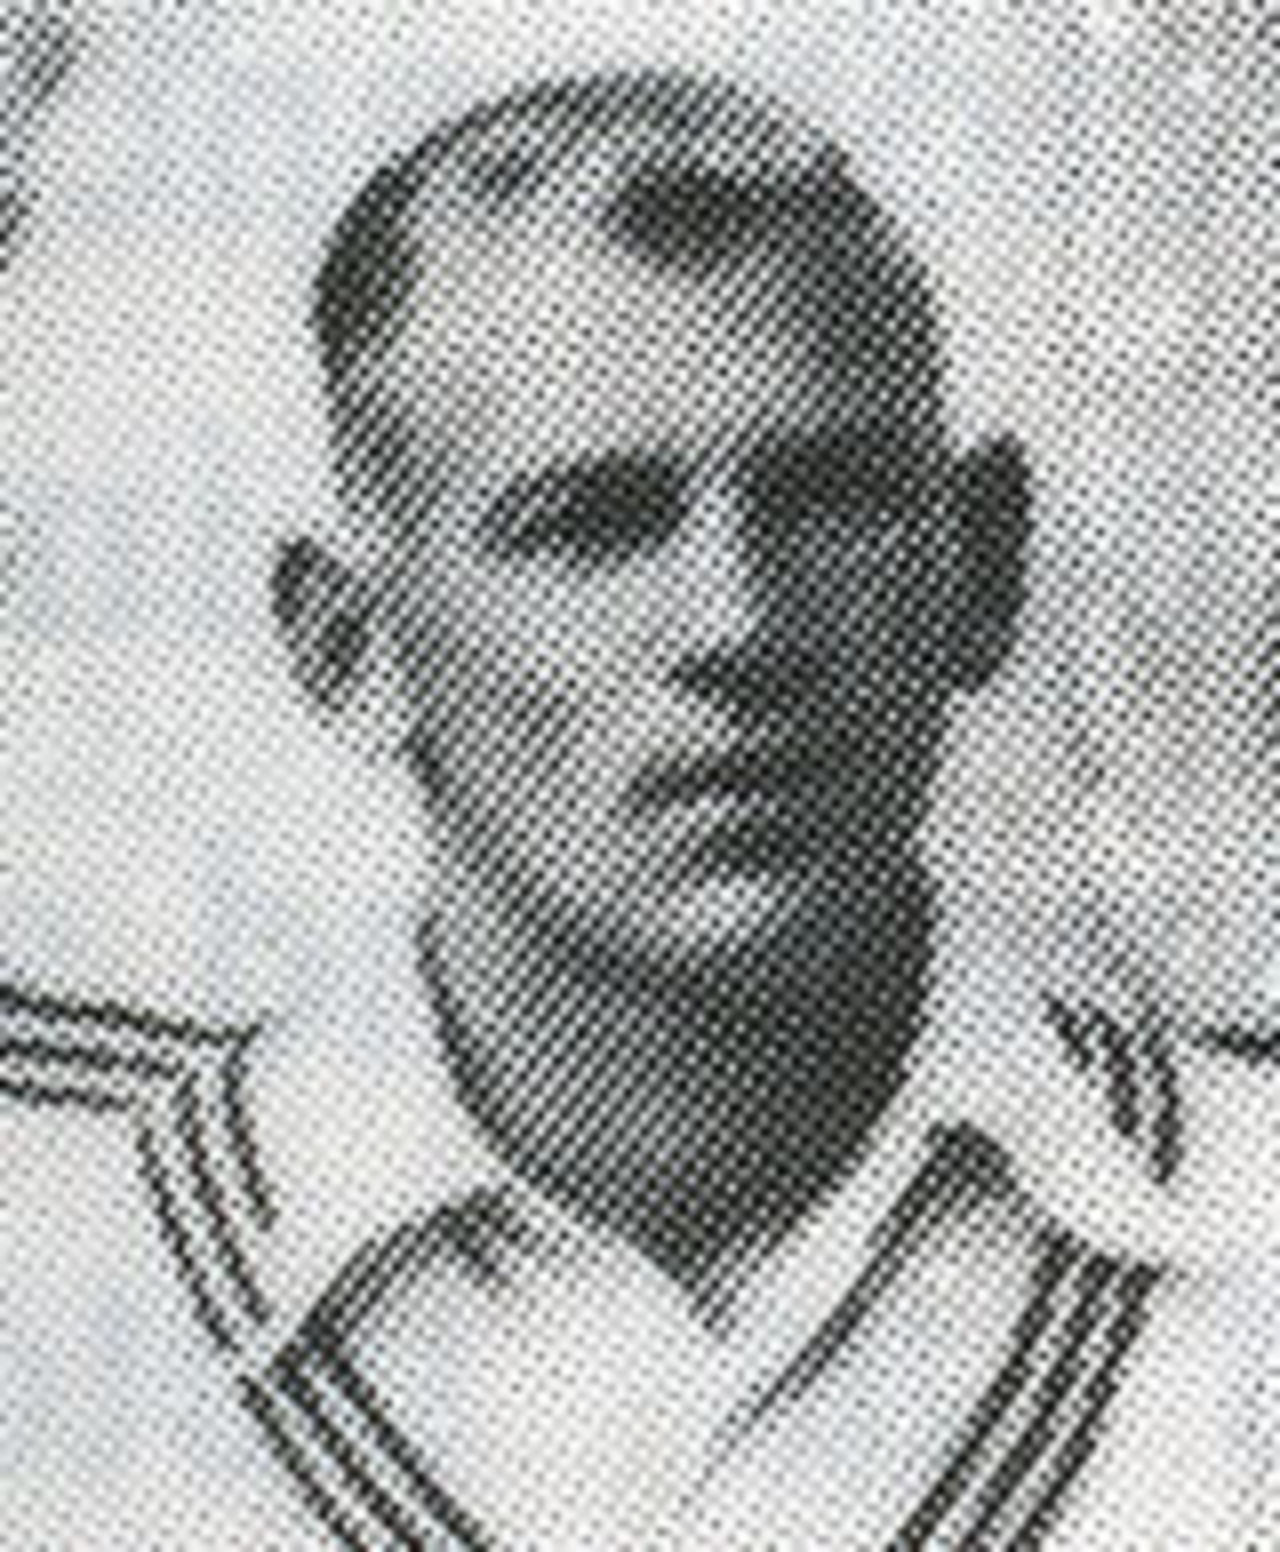 Eric Tindill pictured on New Zealand's 1937 tour of England